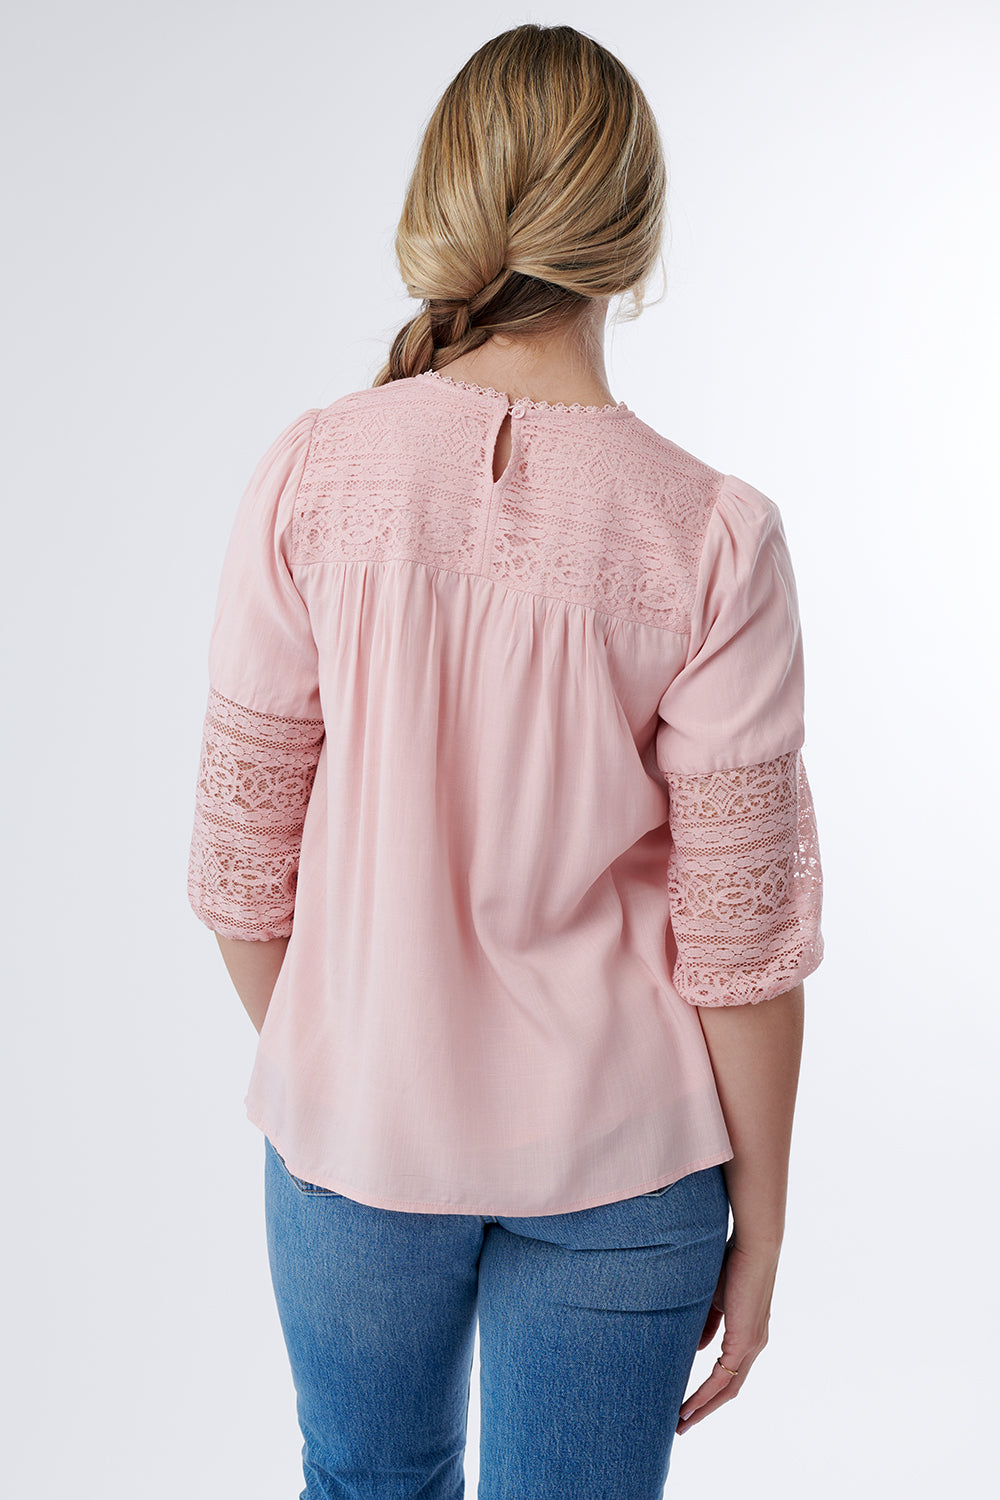 Keep Things Classy Lace Top